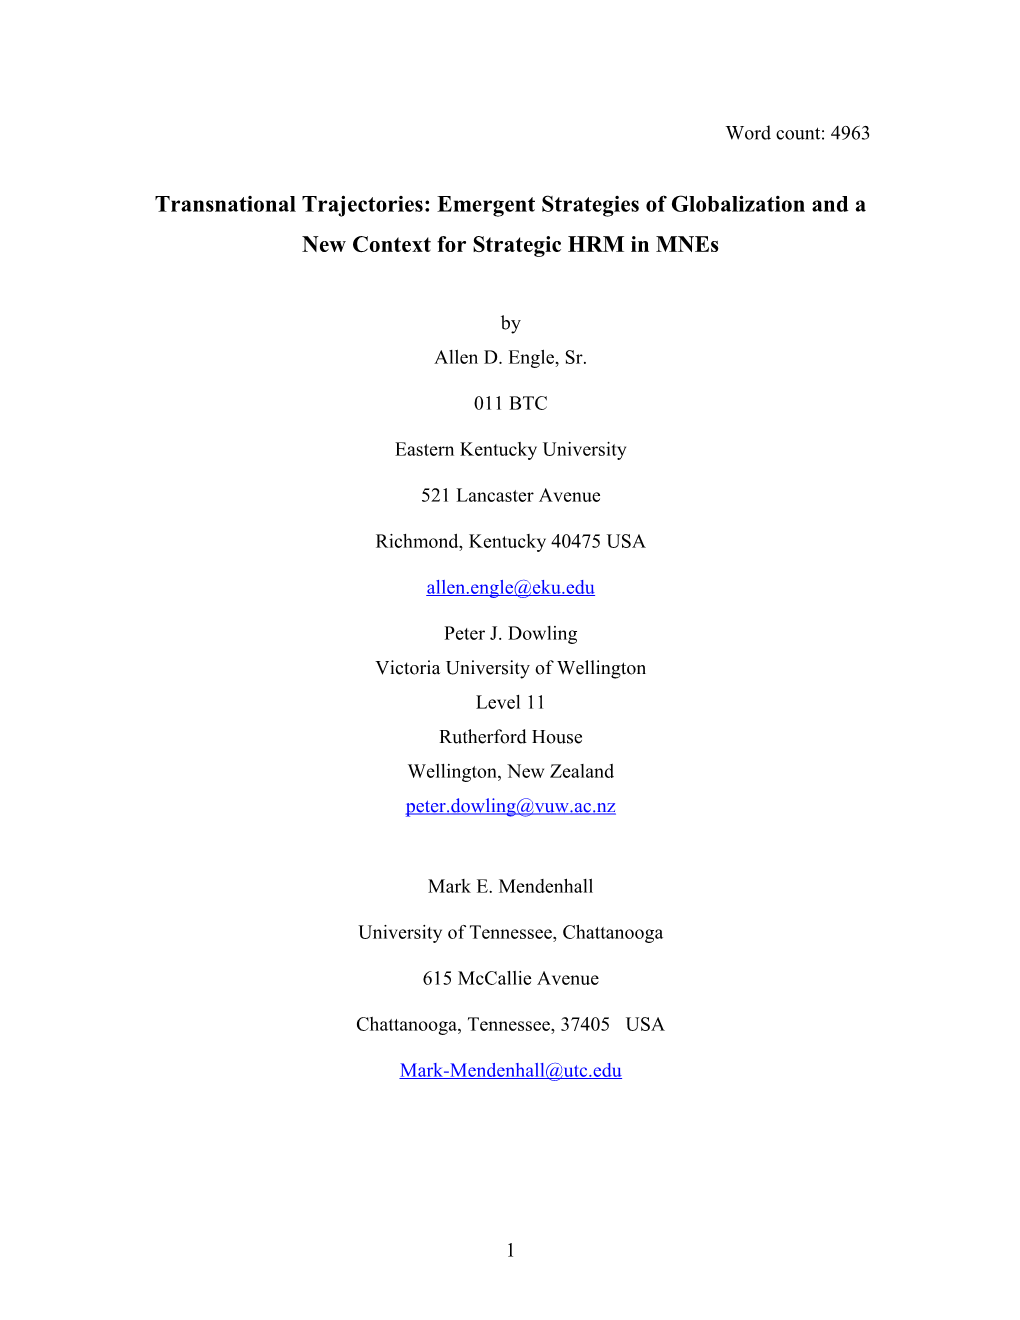 Transnational Trajectories: Emergent Strategies of Globalization and a New Context For